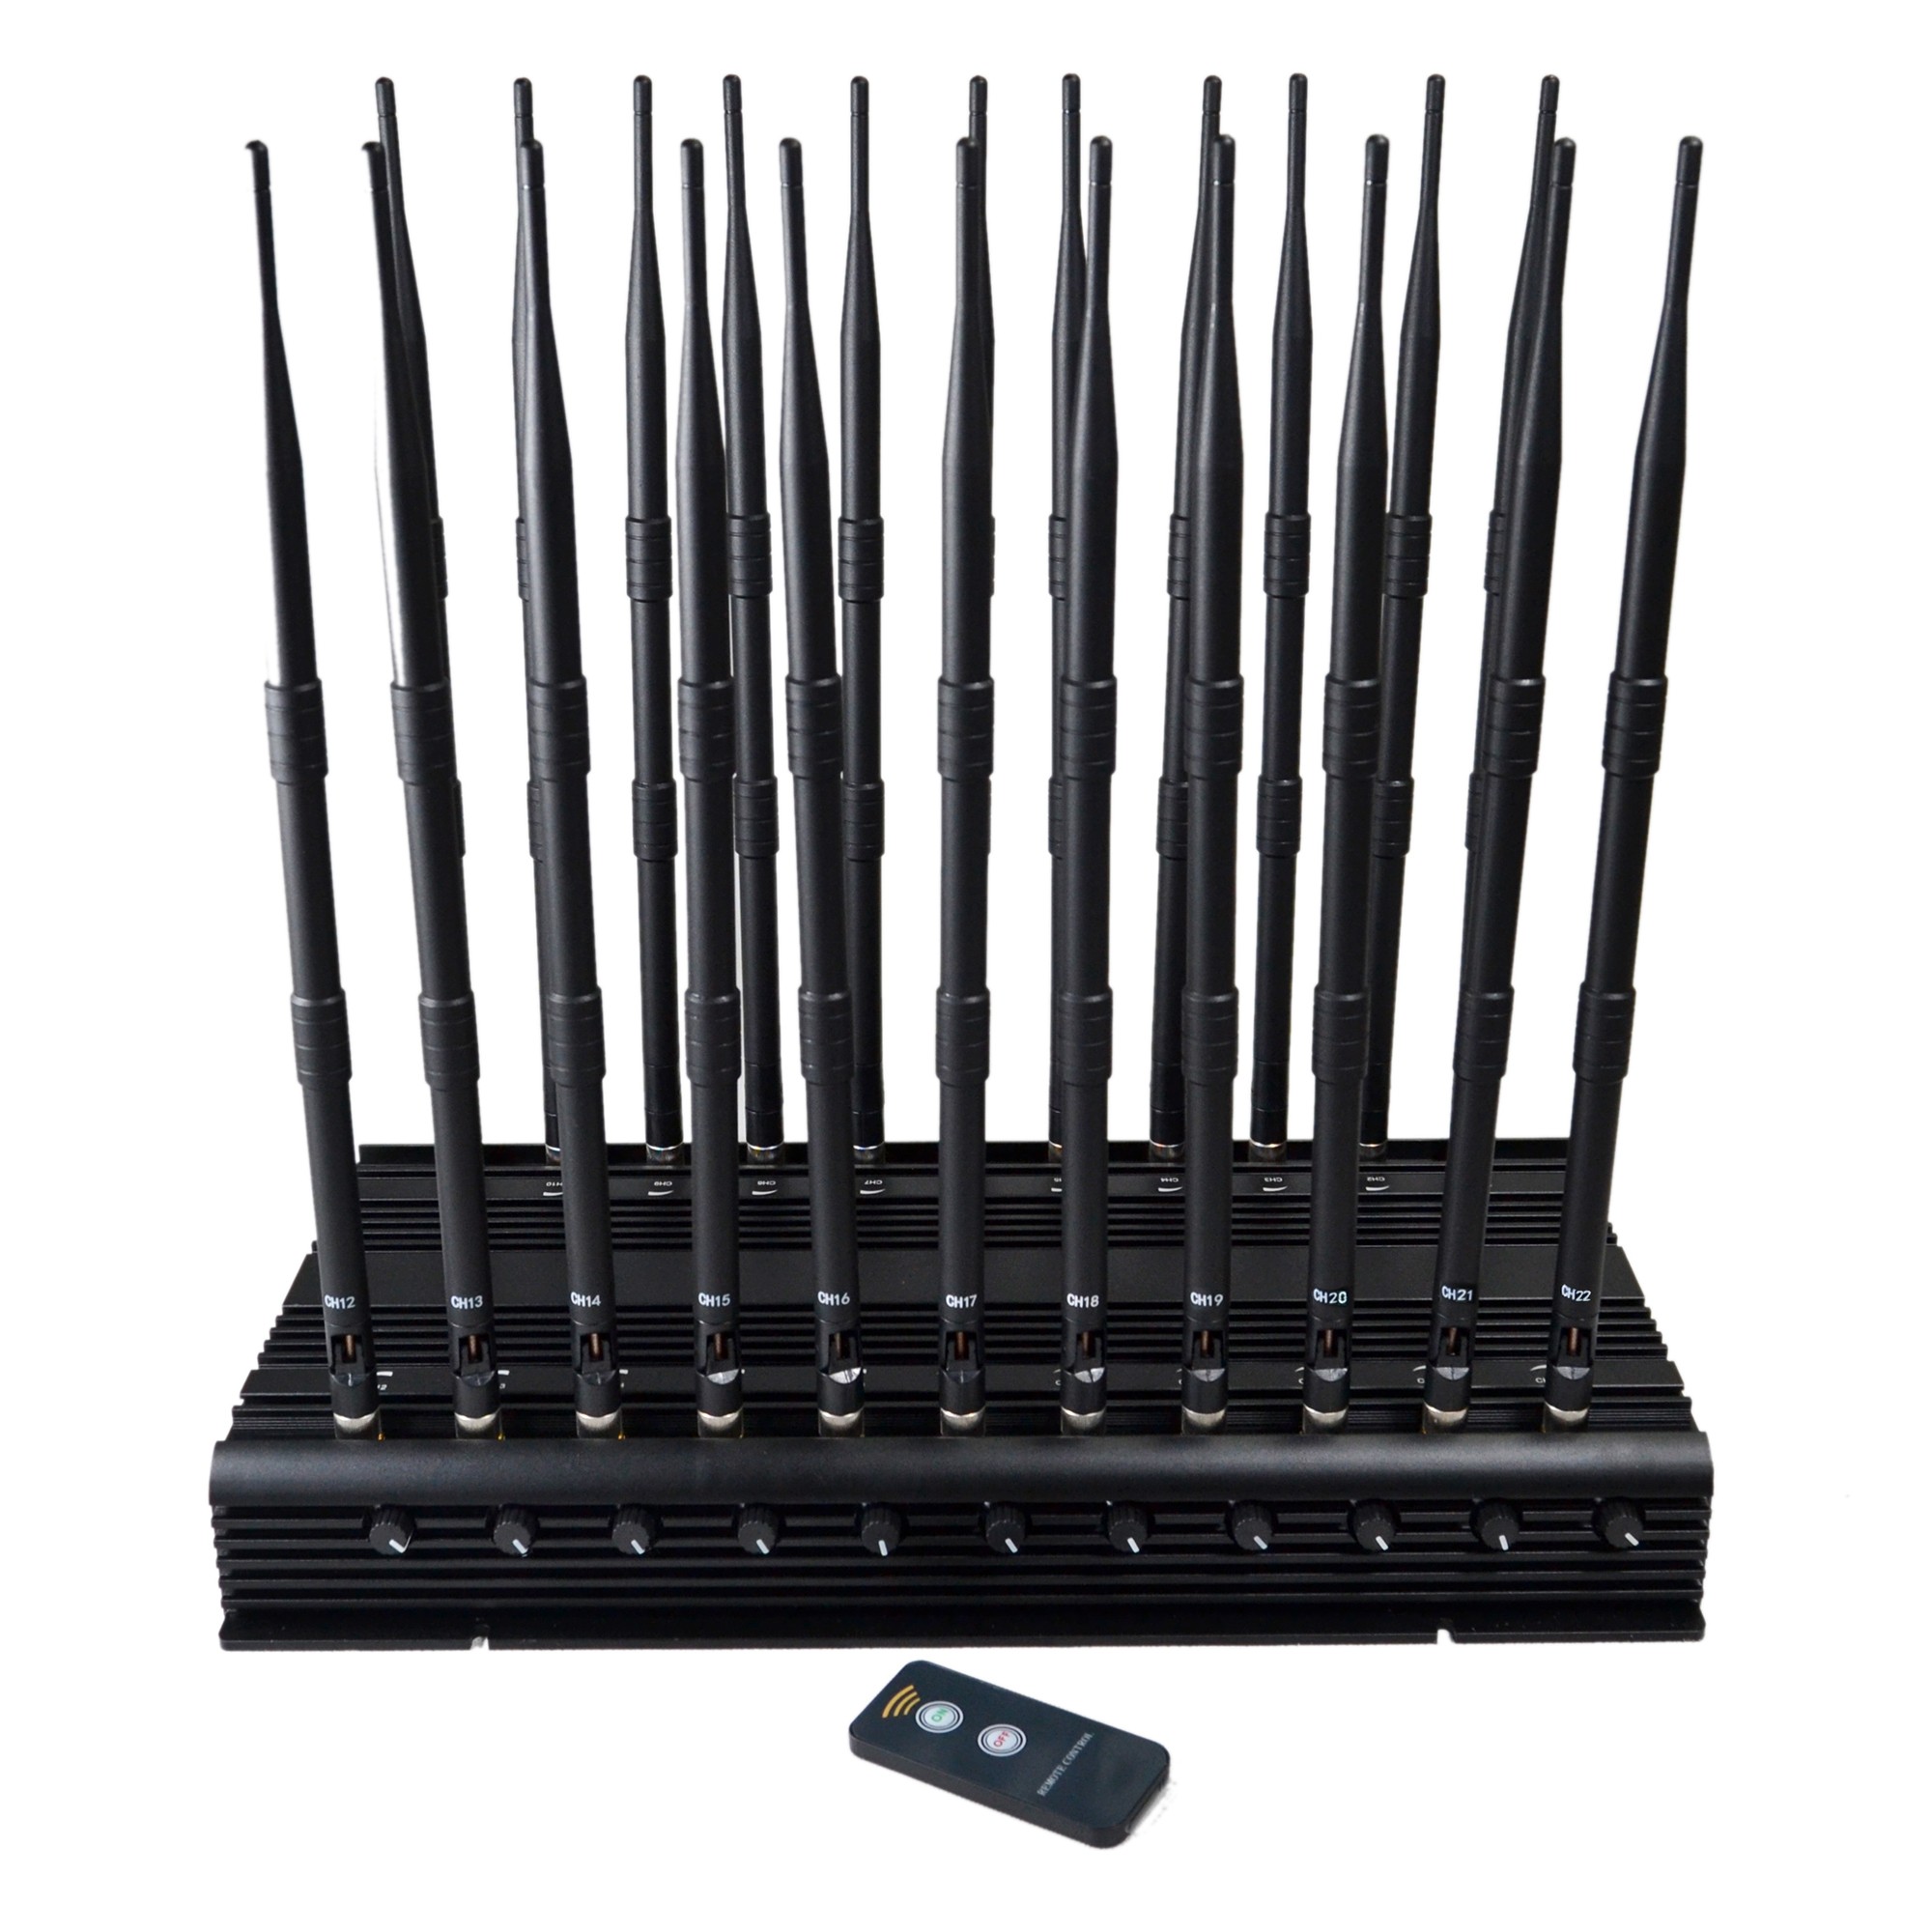 Cell phone jammer function